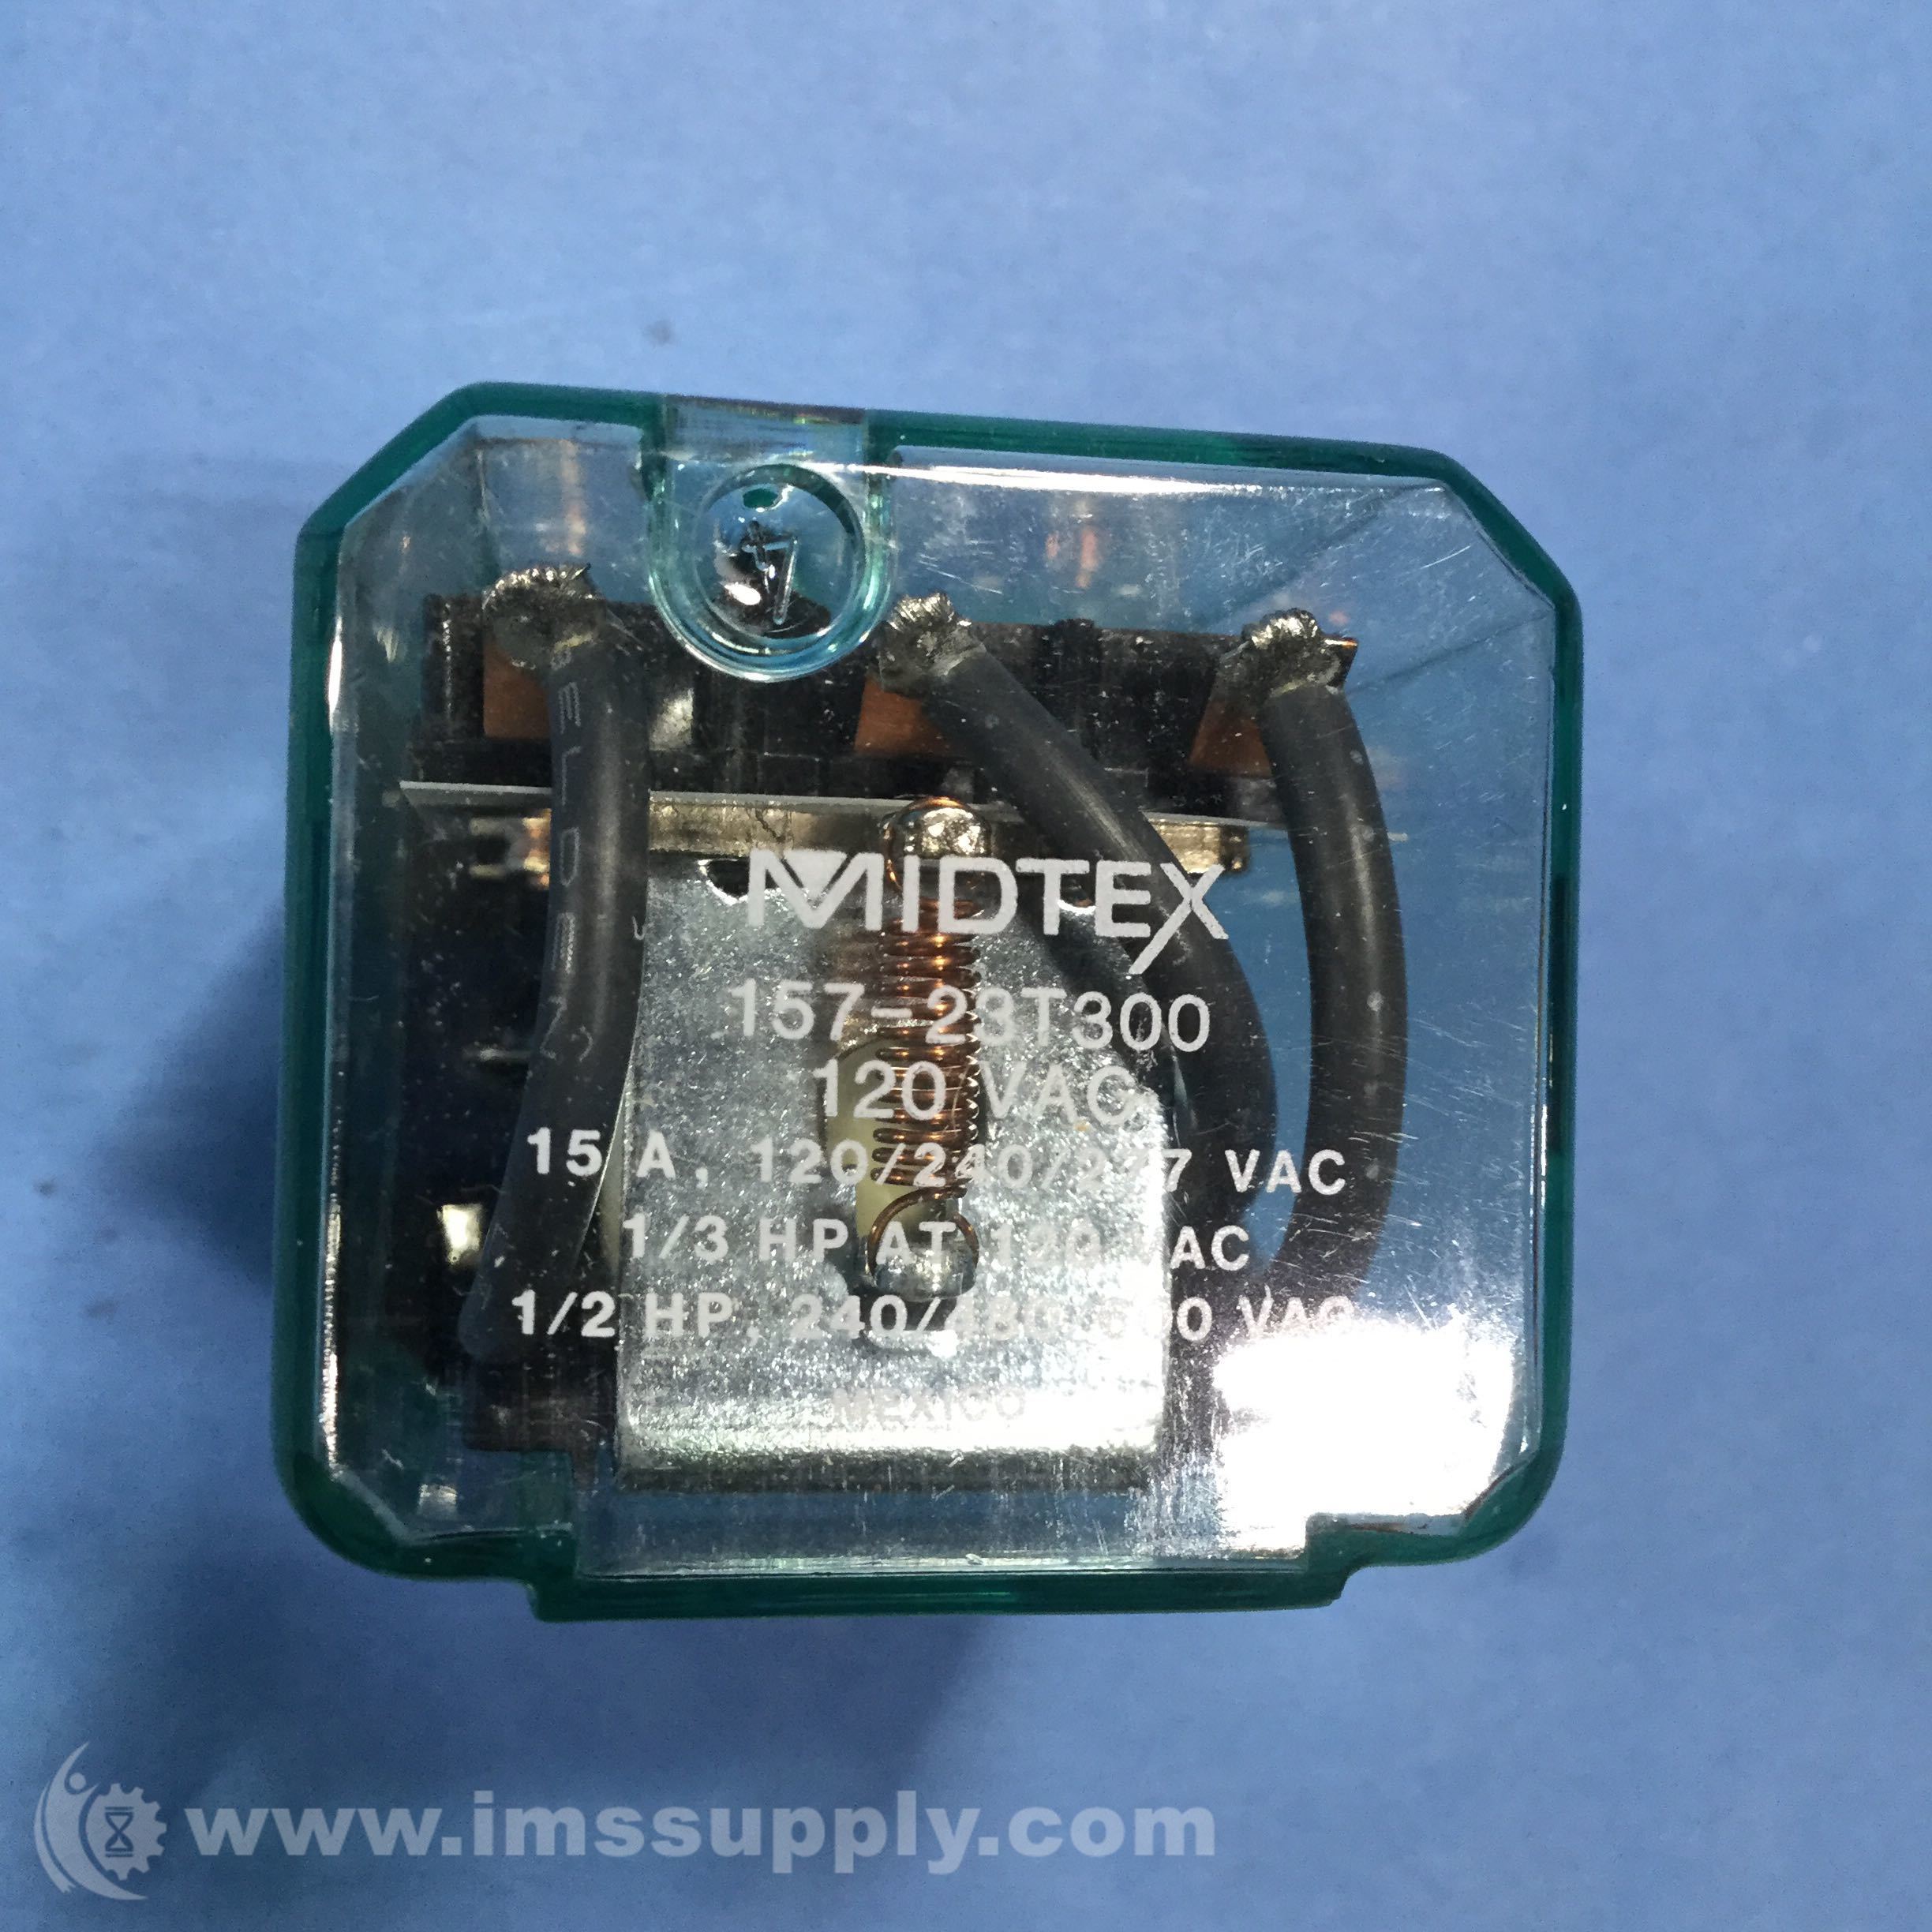 Midtex 157-23T300 General Purpose Power Relay-Plain Cover - IMS Supply